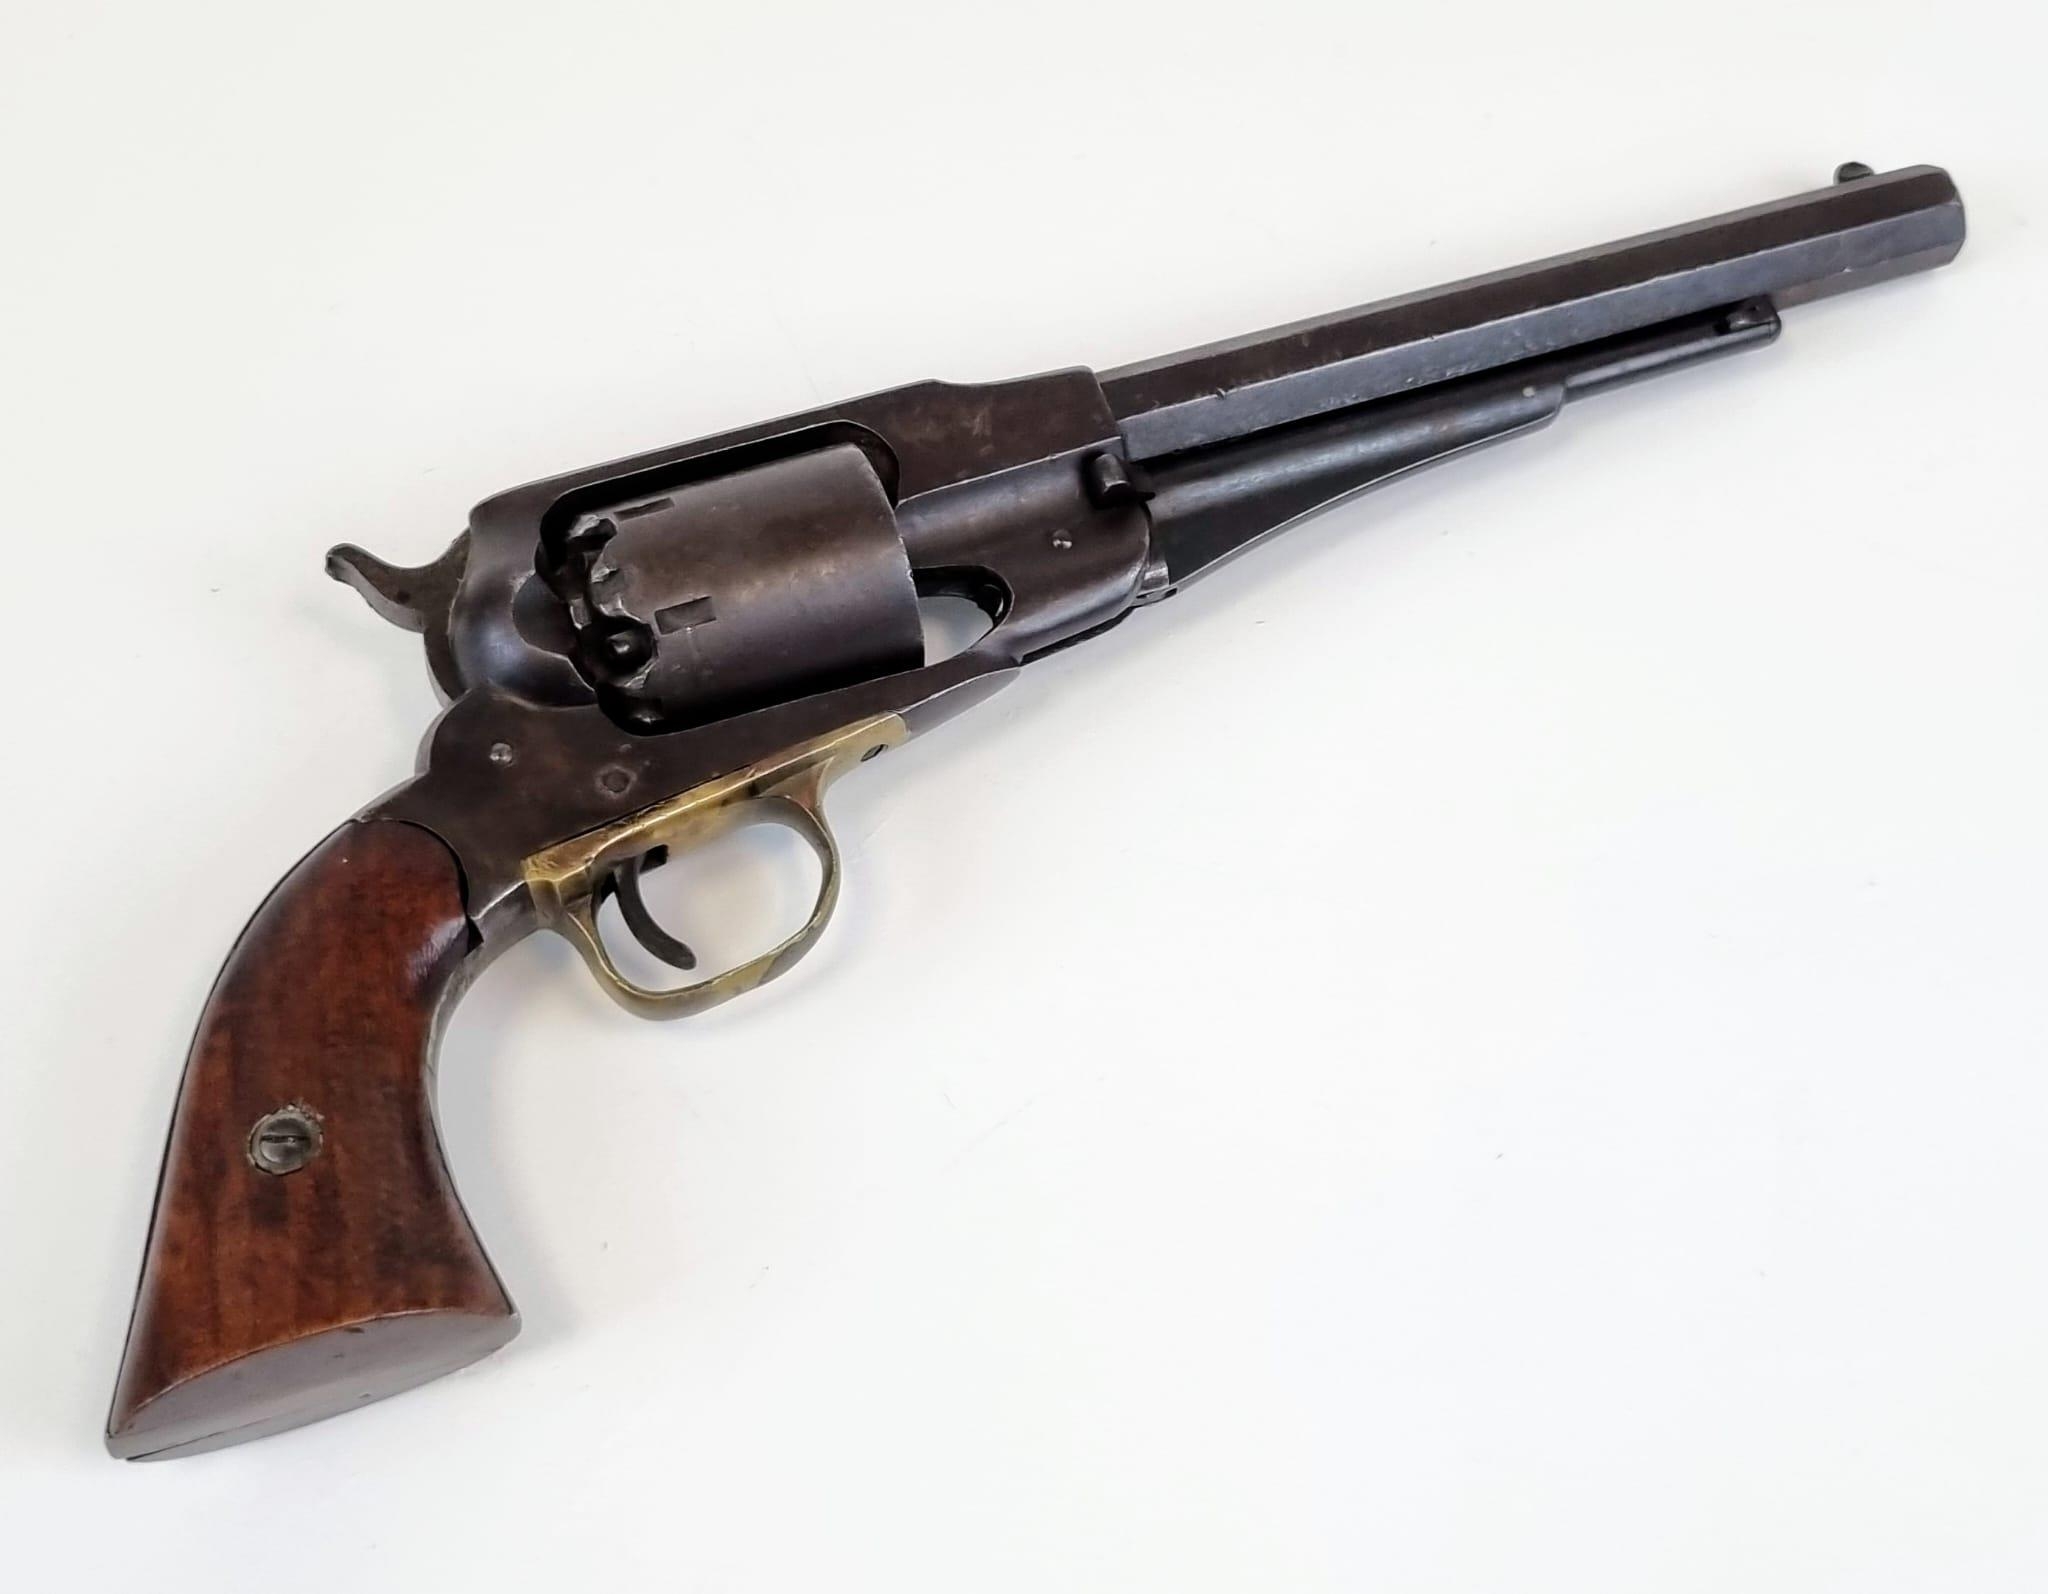 A Black Powder Remington Model 1858 Old Army Revolver. This .44 calibre pistol was manufactured in